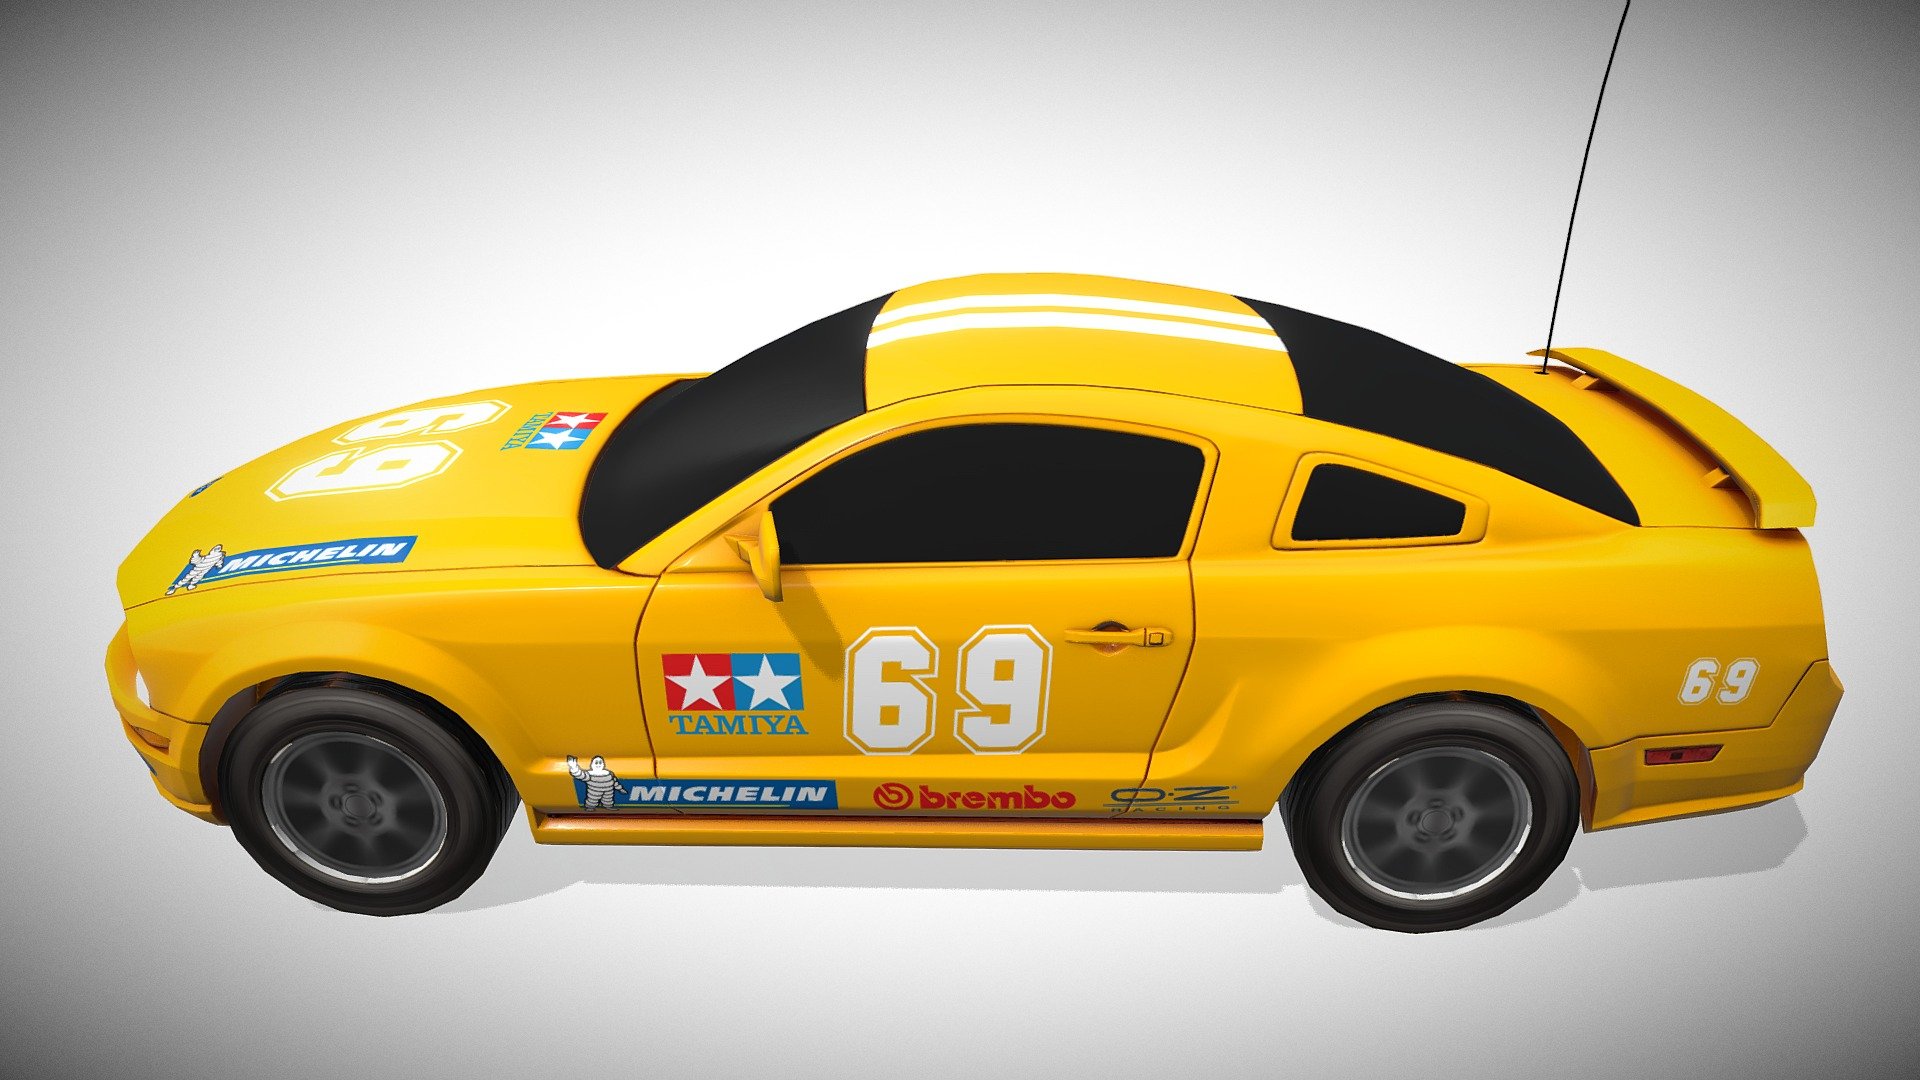 This my entry for Sketchfab Texturing Challenge: Sports Car 3d model